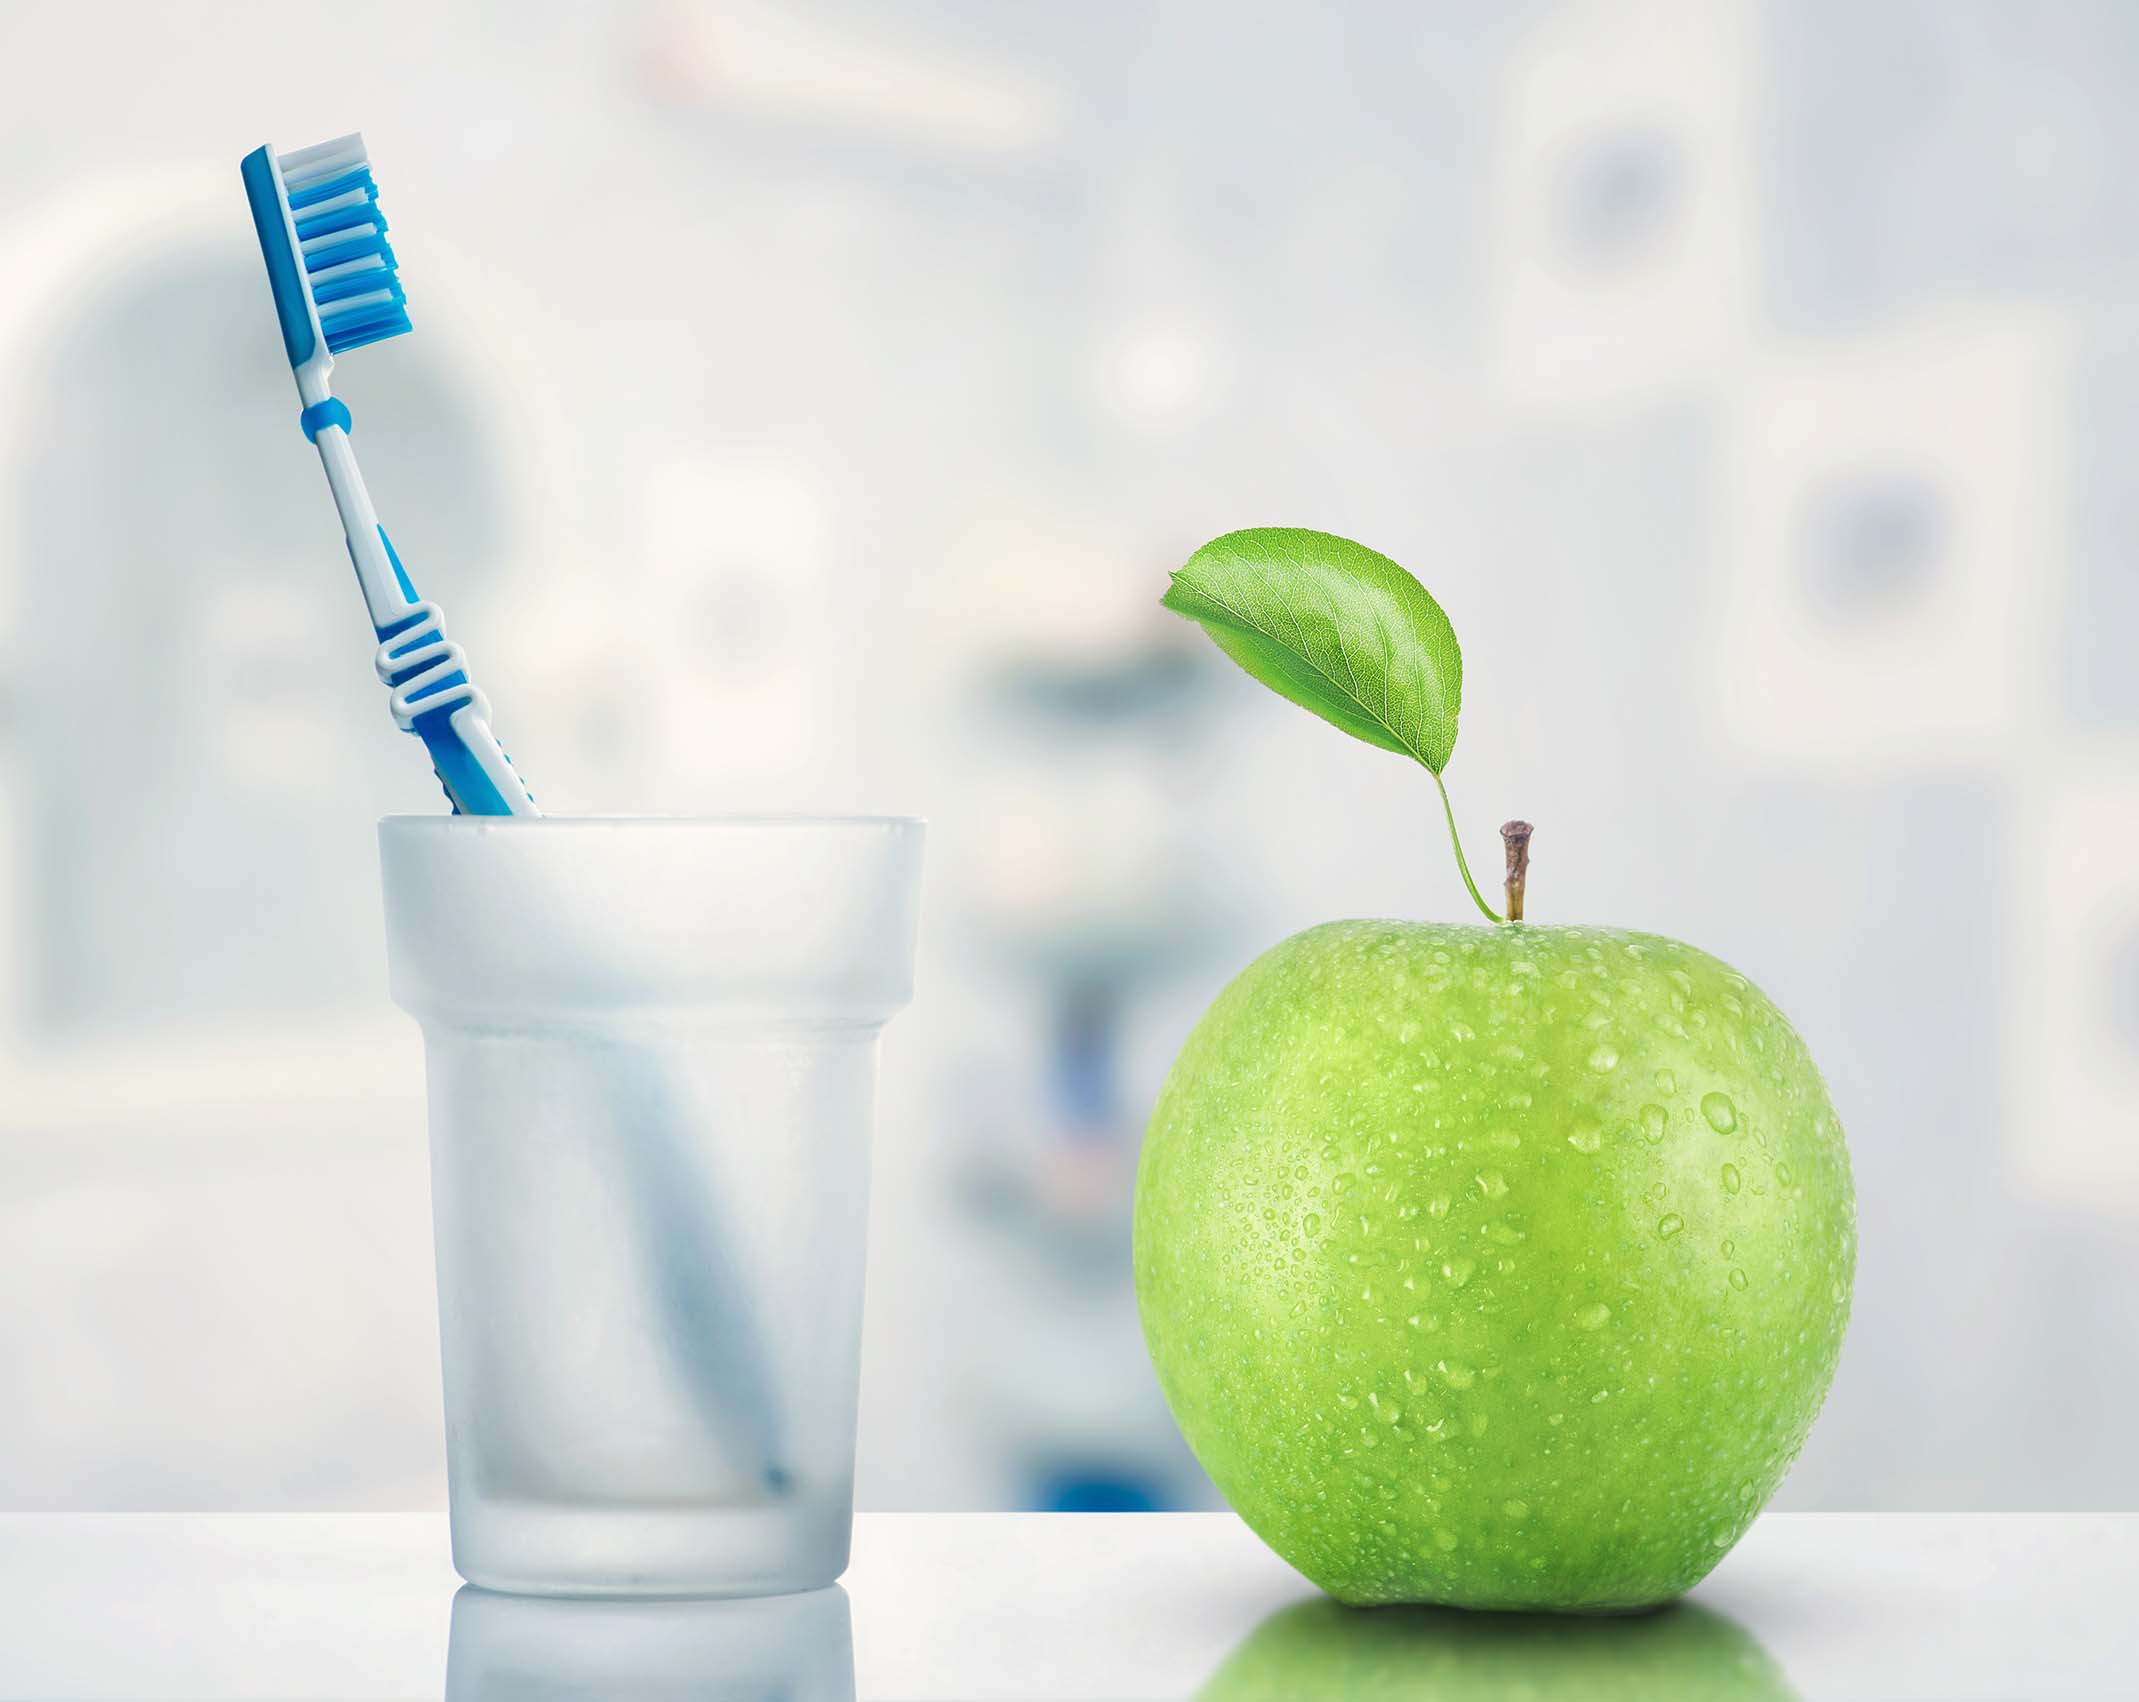 Toothbrush and green apple